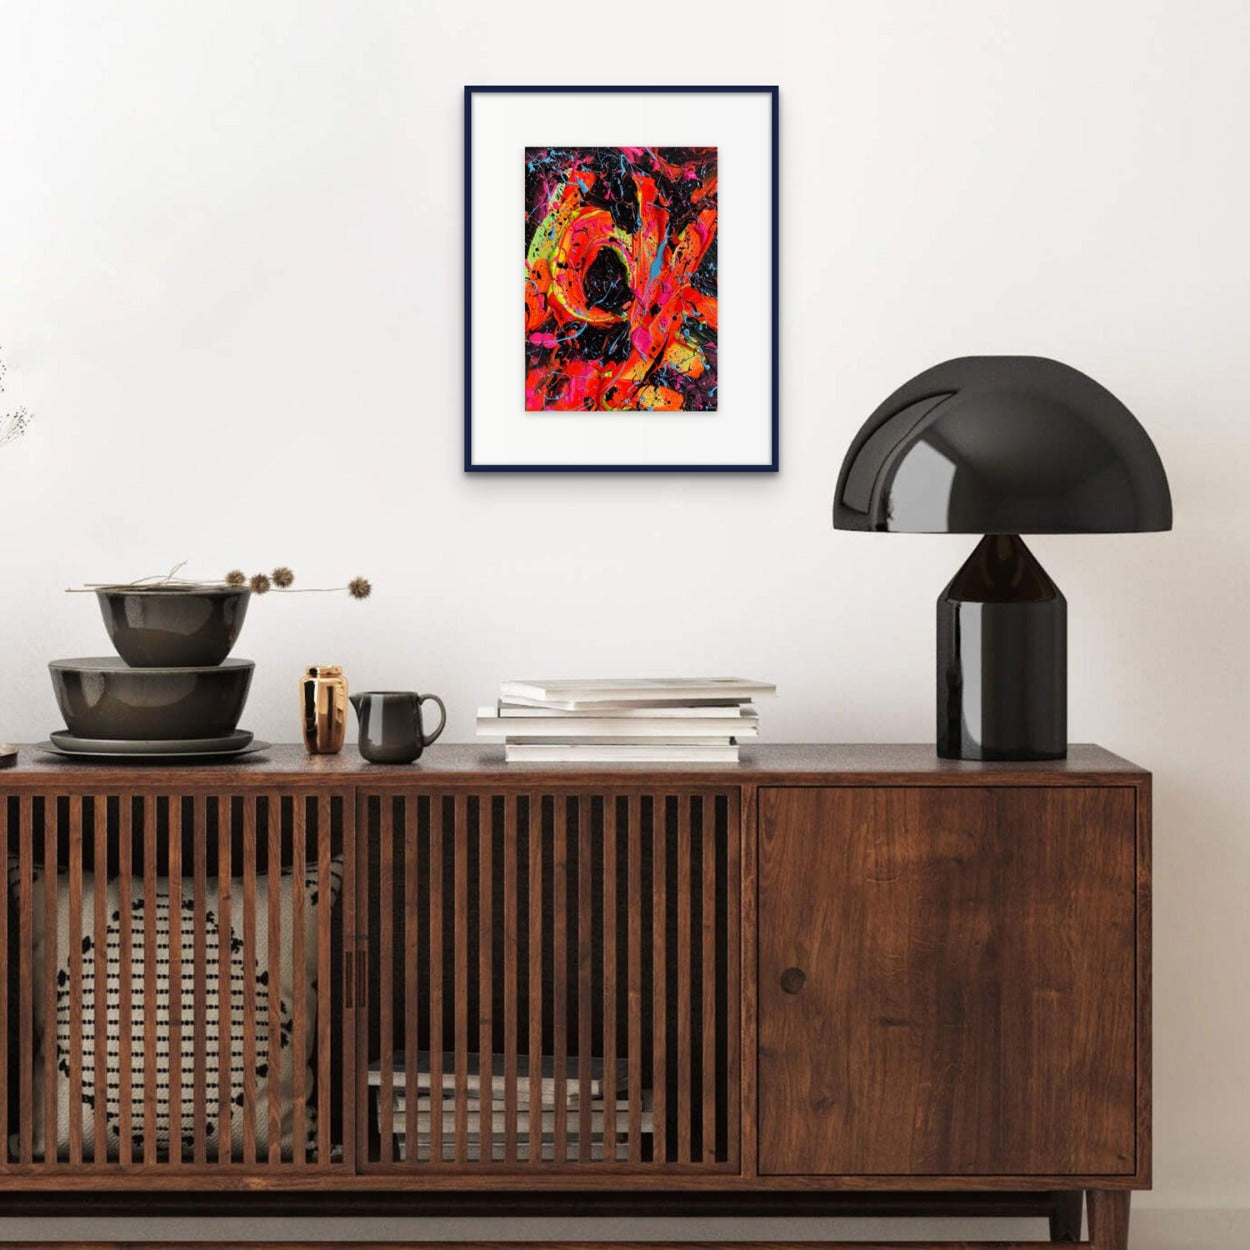 Little Luxuries XV, bold abstract painting seen framed in balck with white mat hanging above a wooden cabinet with black lamp. Artwork created by Brigdet Bradley, abstract expressionism artist